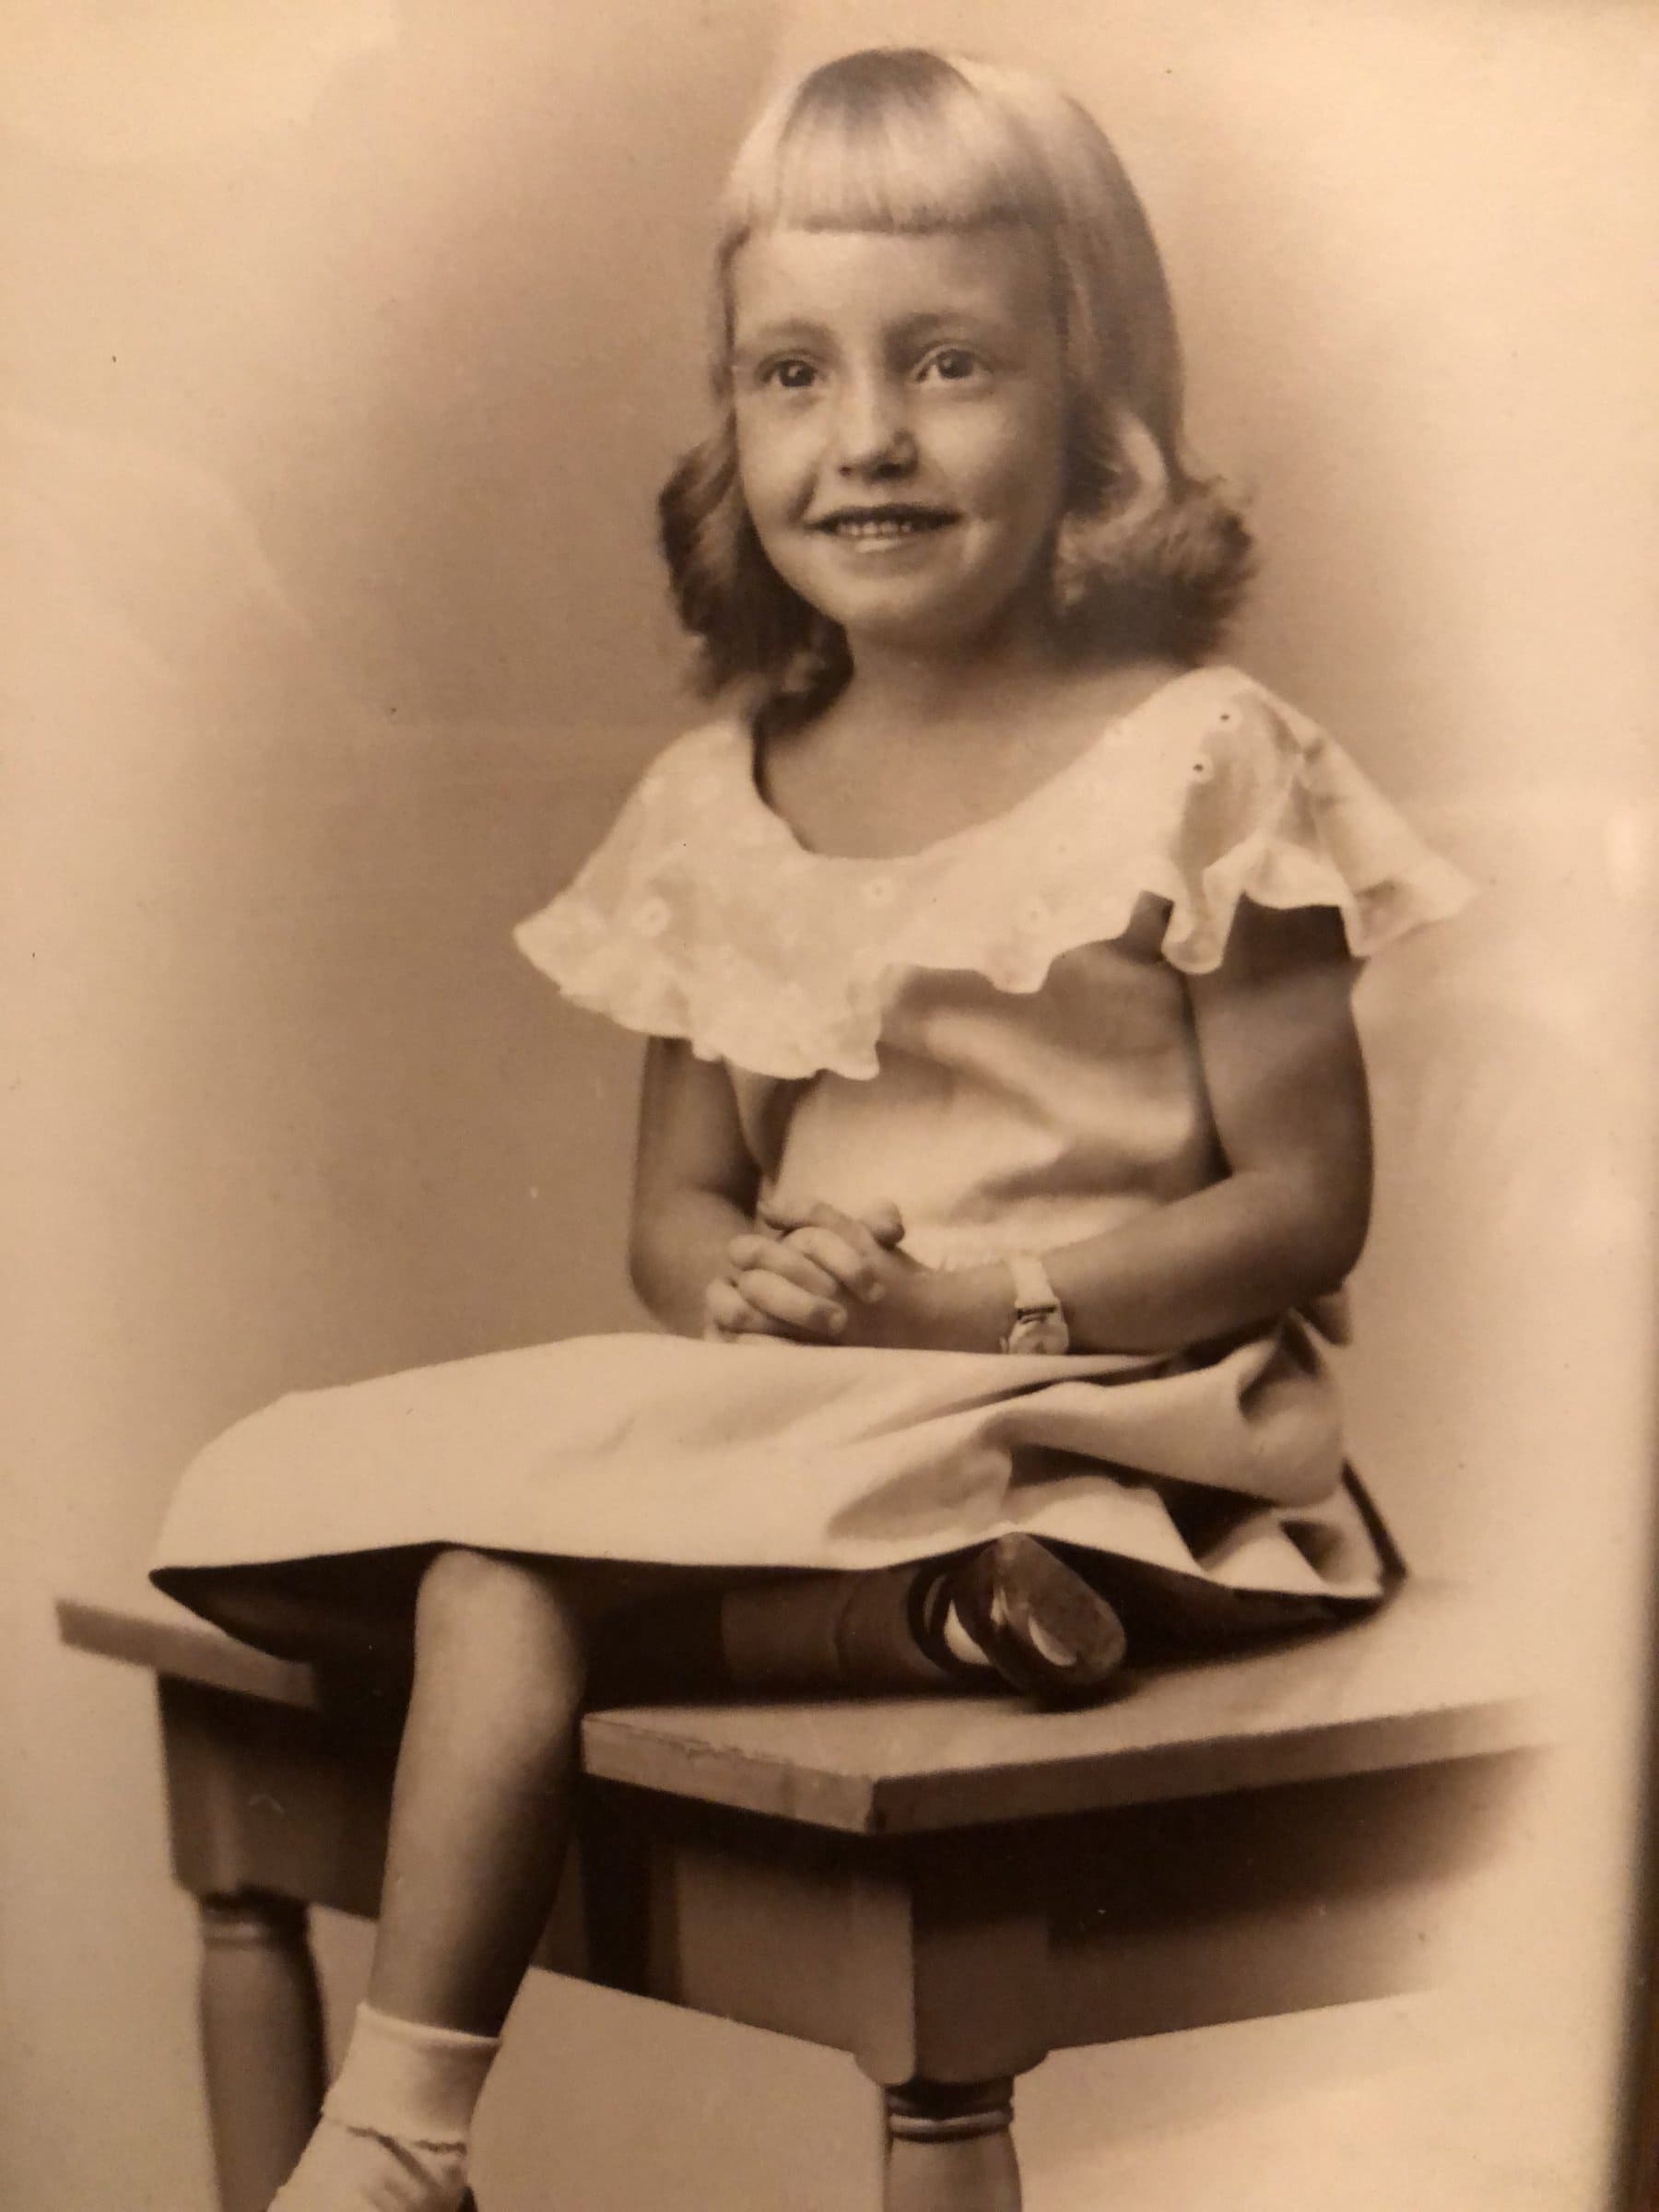 My mother as a child